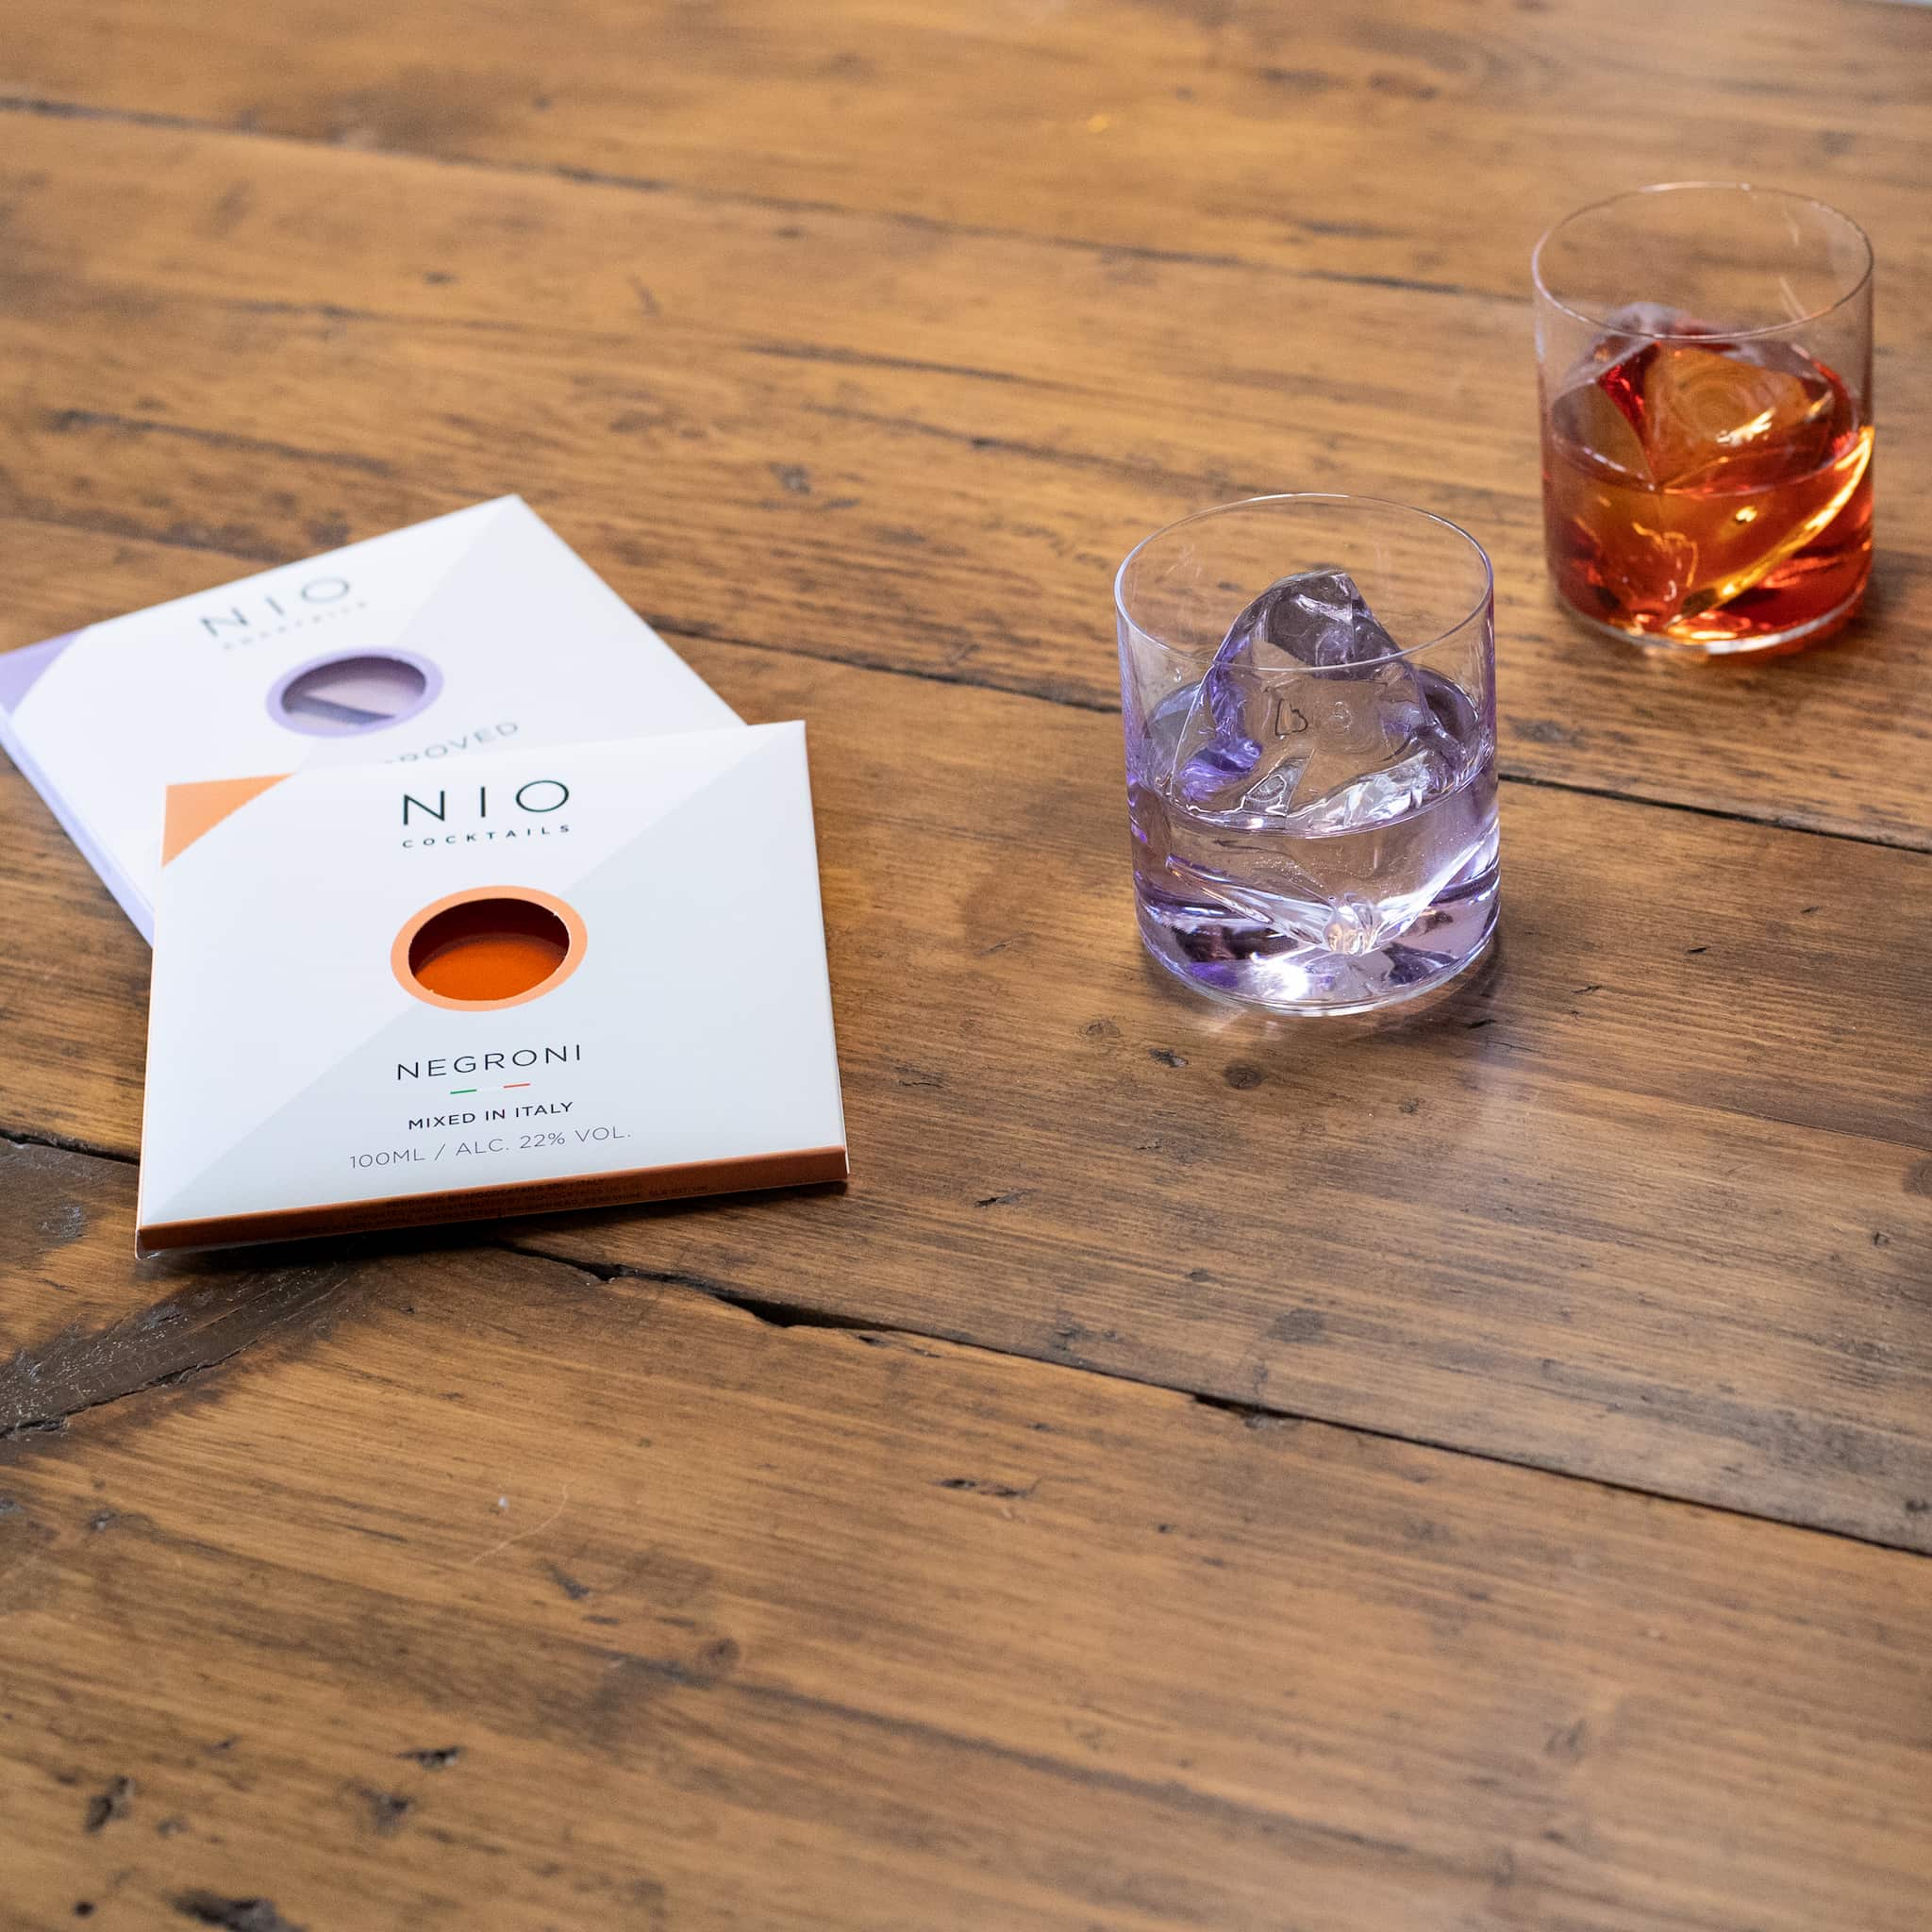 Featuring our best-selling gin cocktails - including two each of our award-winning Negroni and Gin Proved. The Gin Cocktail Box provides a gin tasting from the classic bitter-sweet to classic sours that both expert and new cocktail lovers will enjoy.